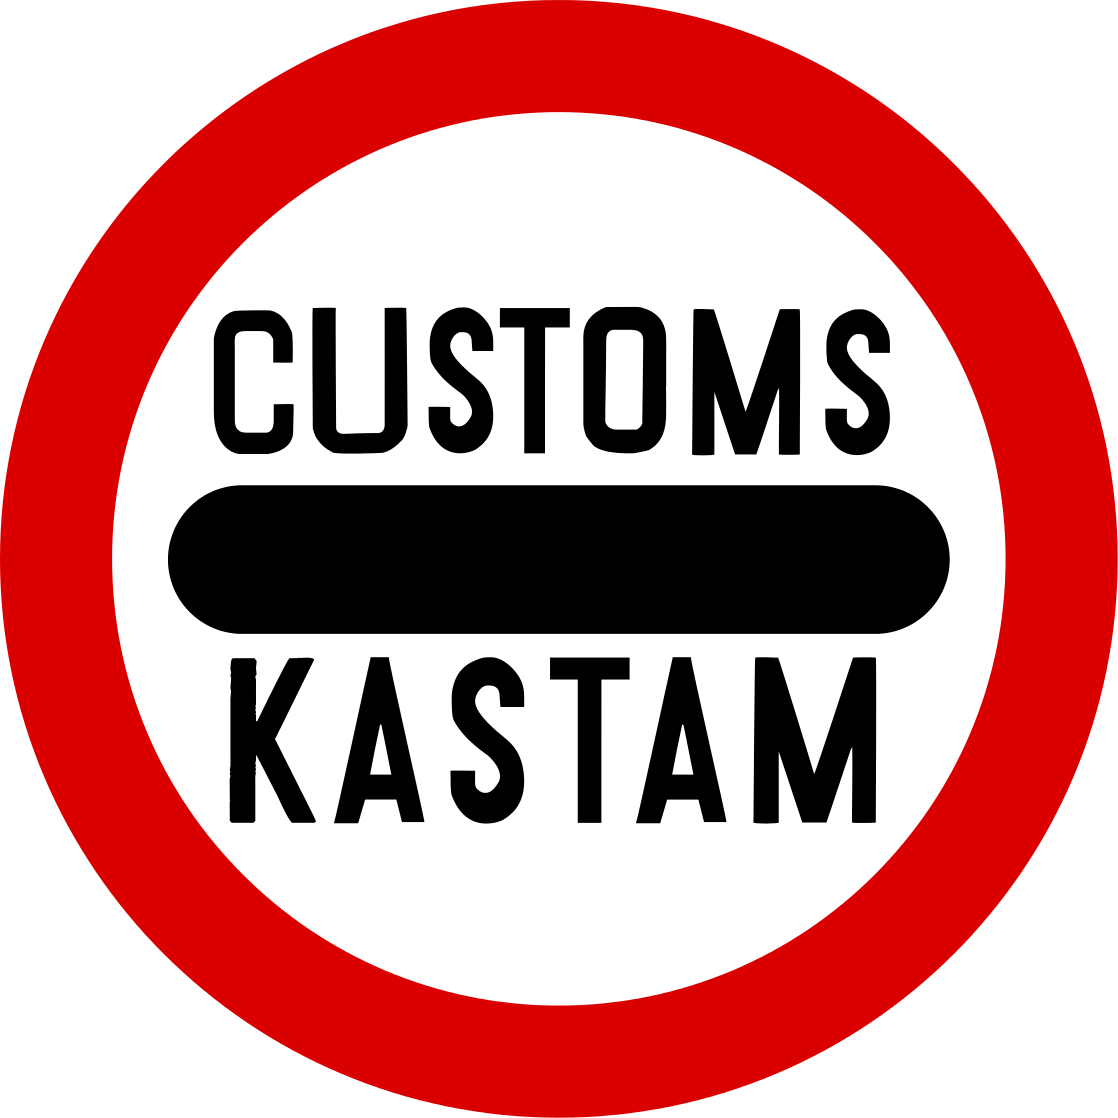 Mandatory stop for Customs at checkpoint